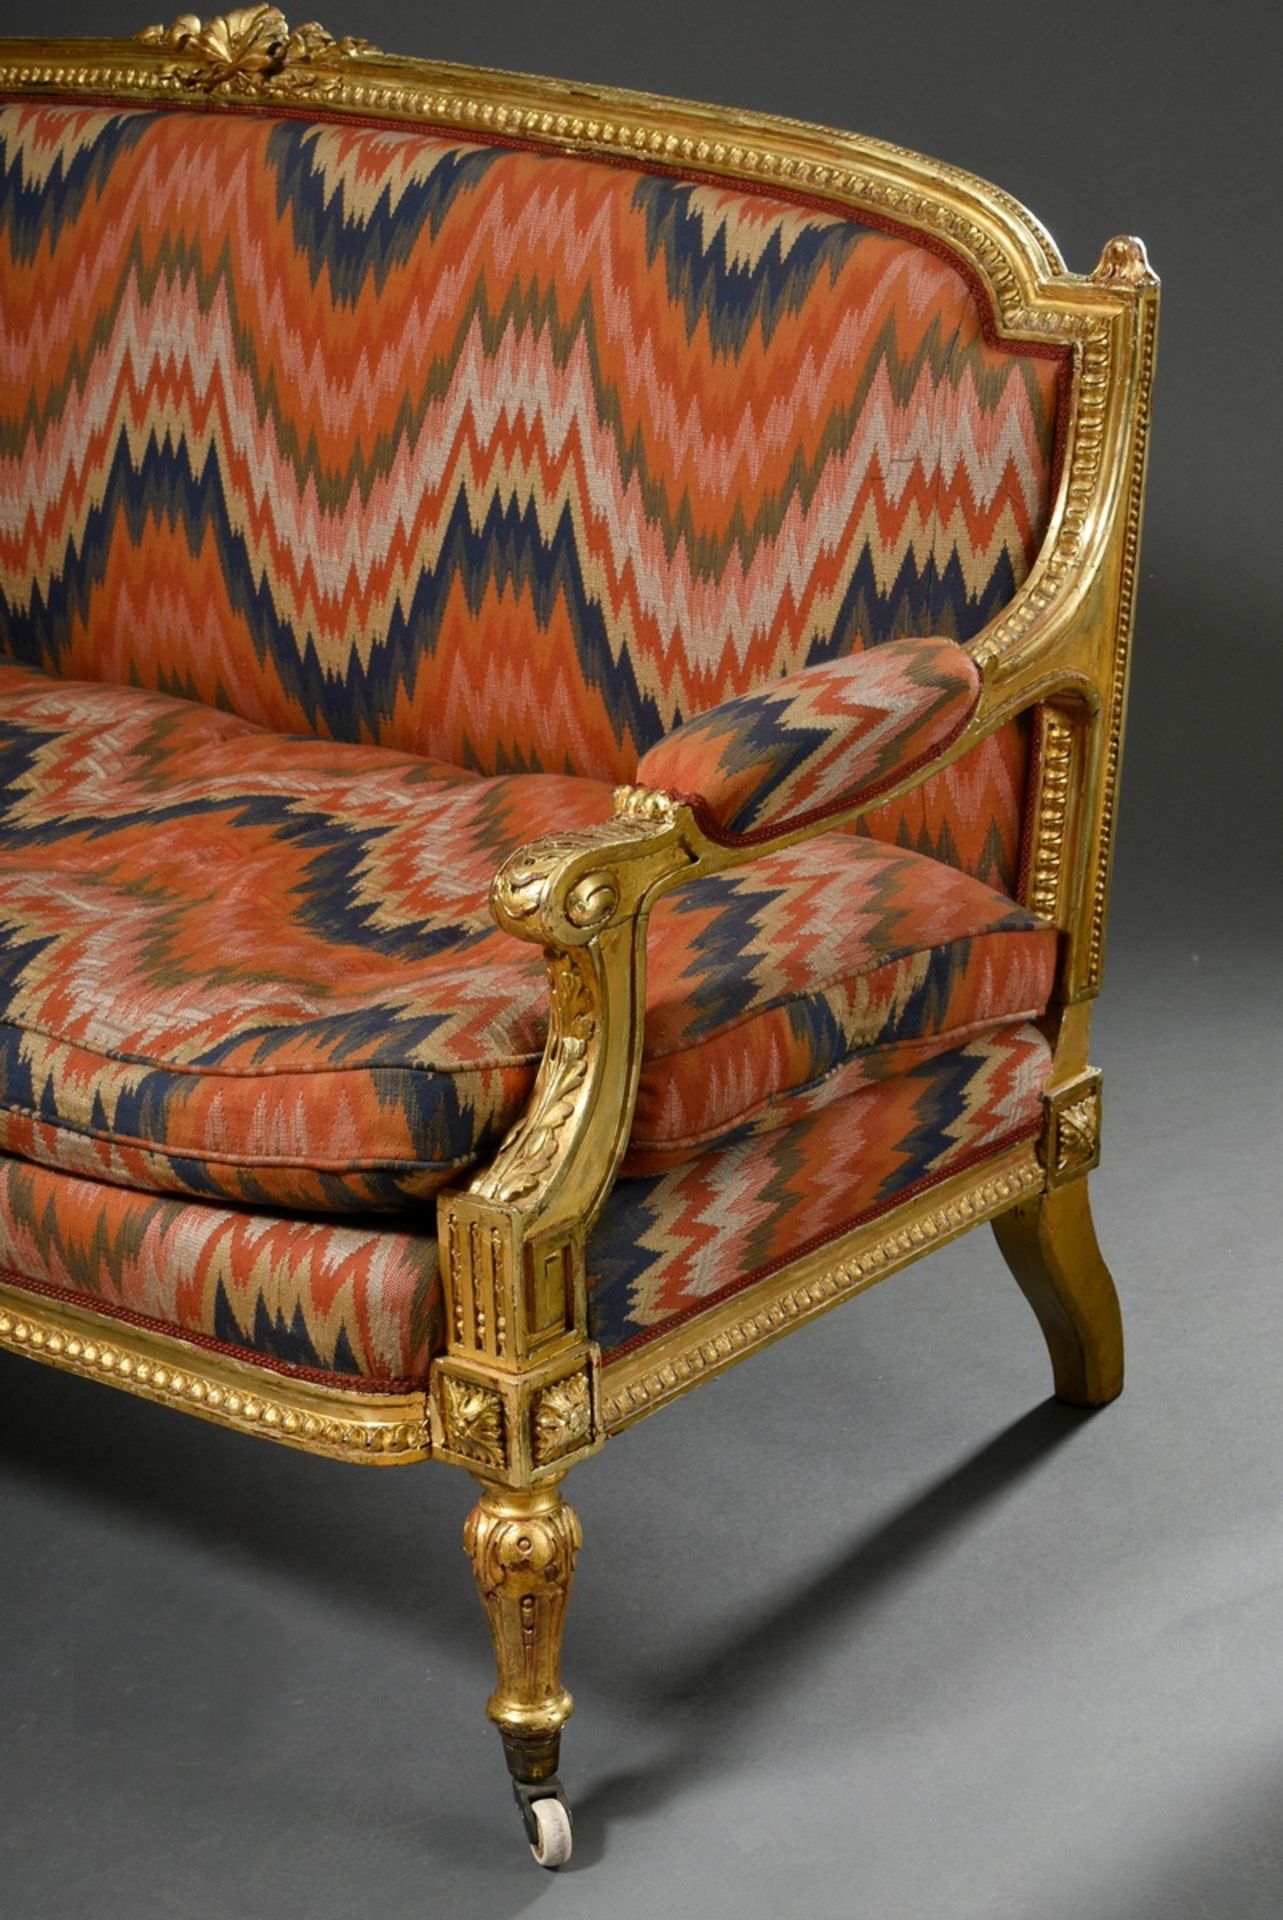 Louis XVI style sofa with leaf-gilded carved frame and opulent upholstery fabric in ikat look, arou - Image 3 of 6